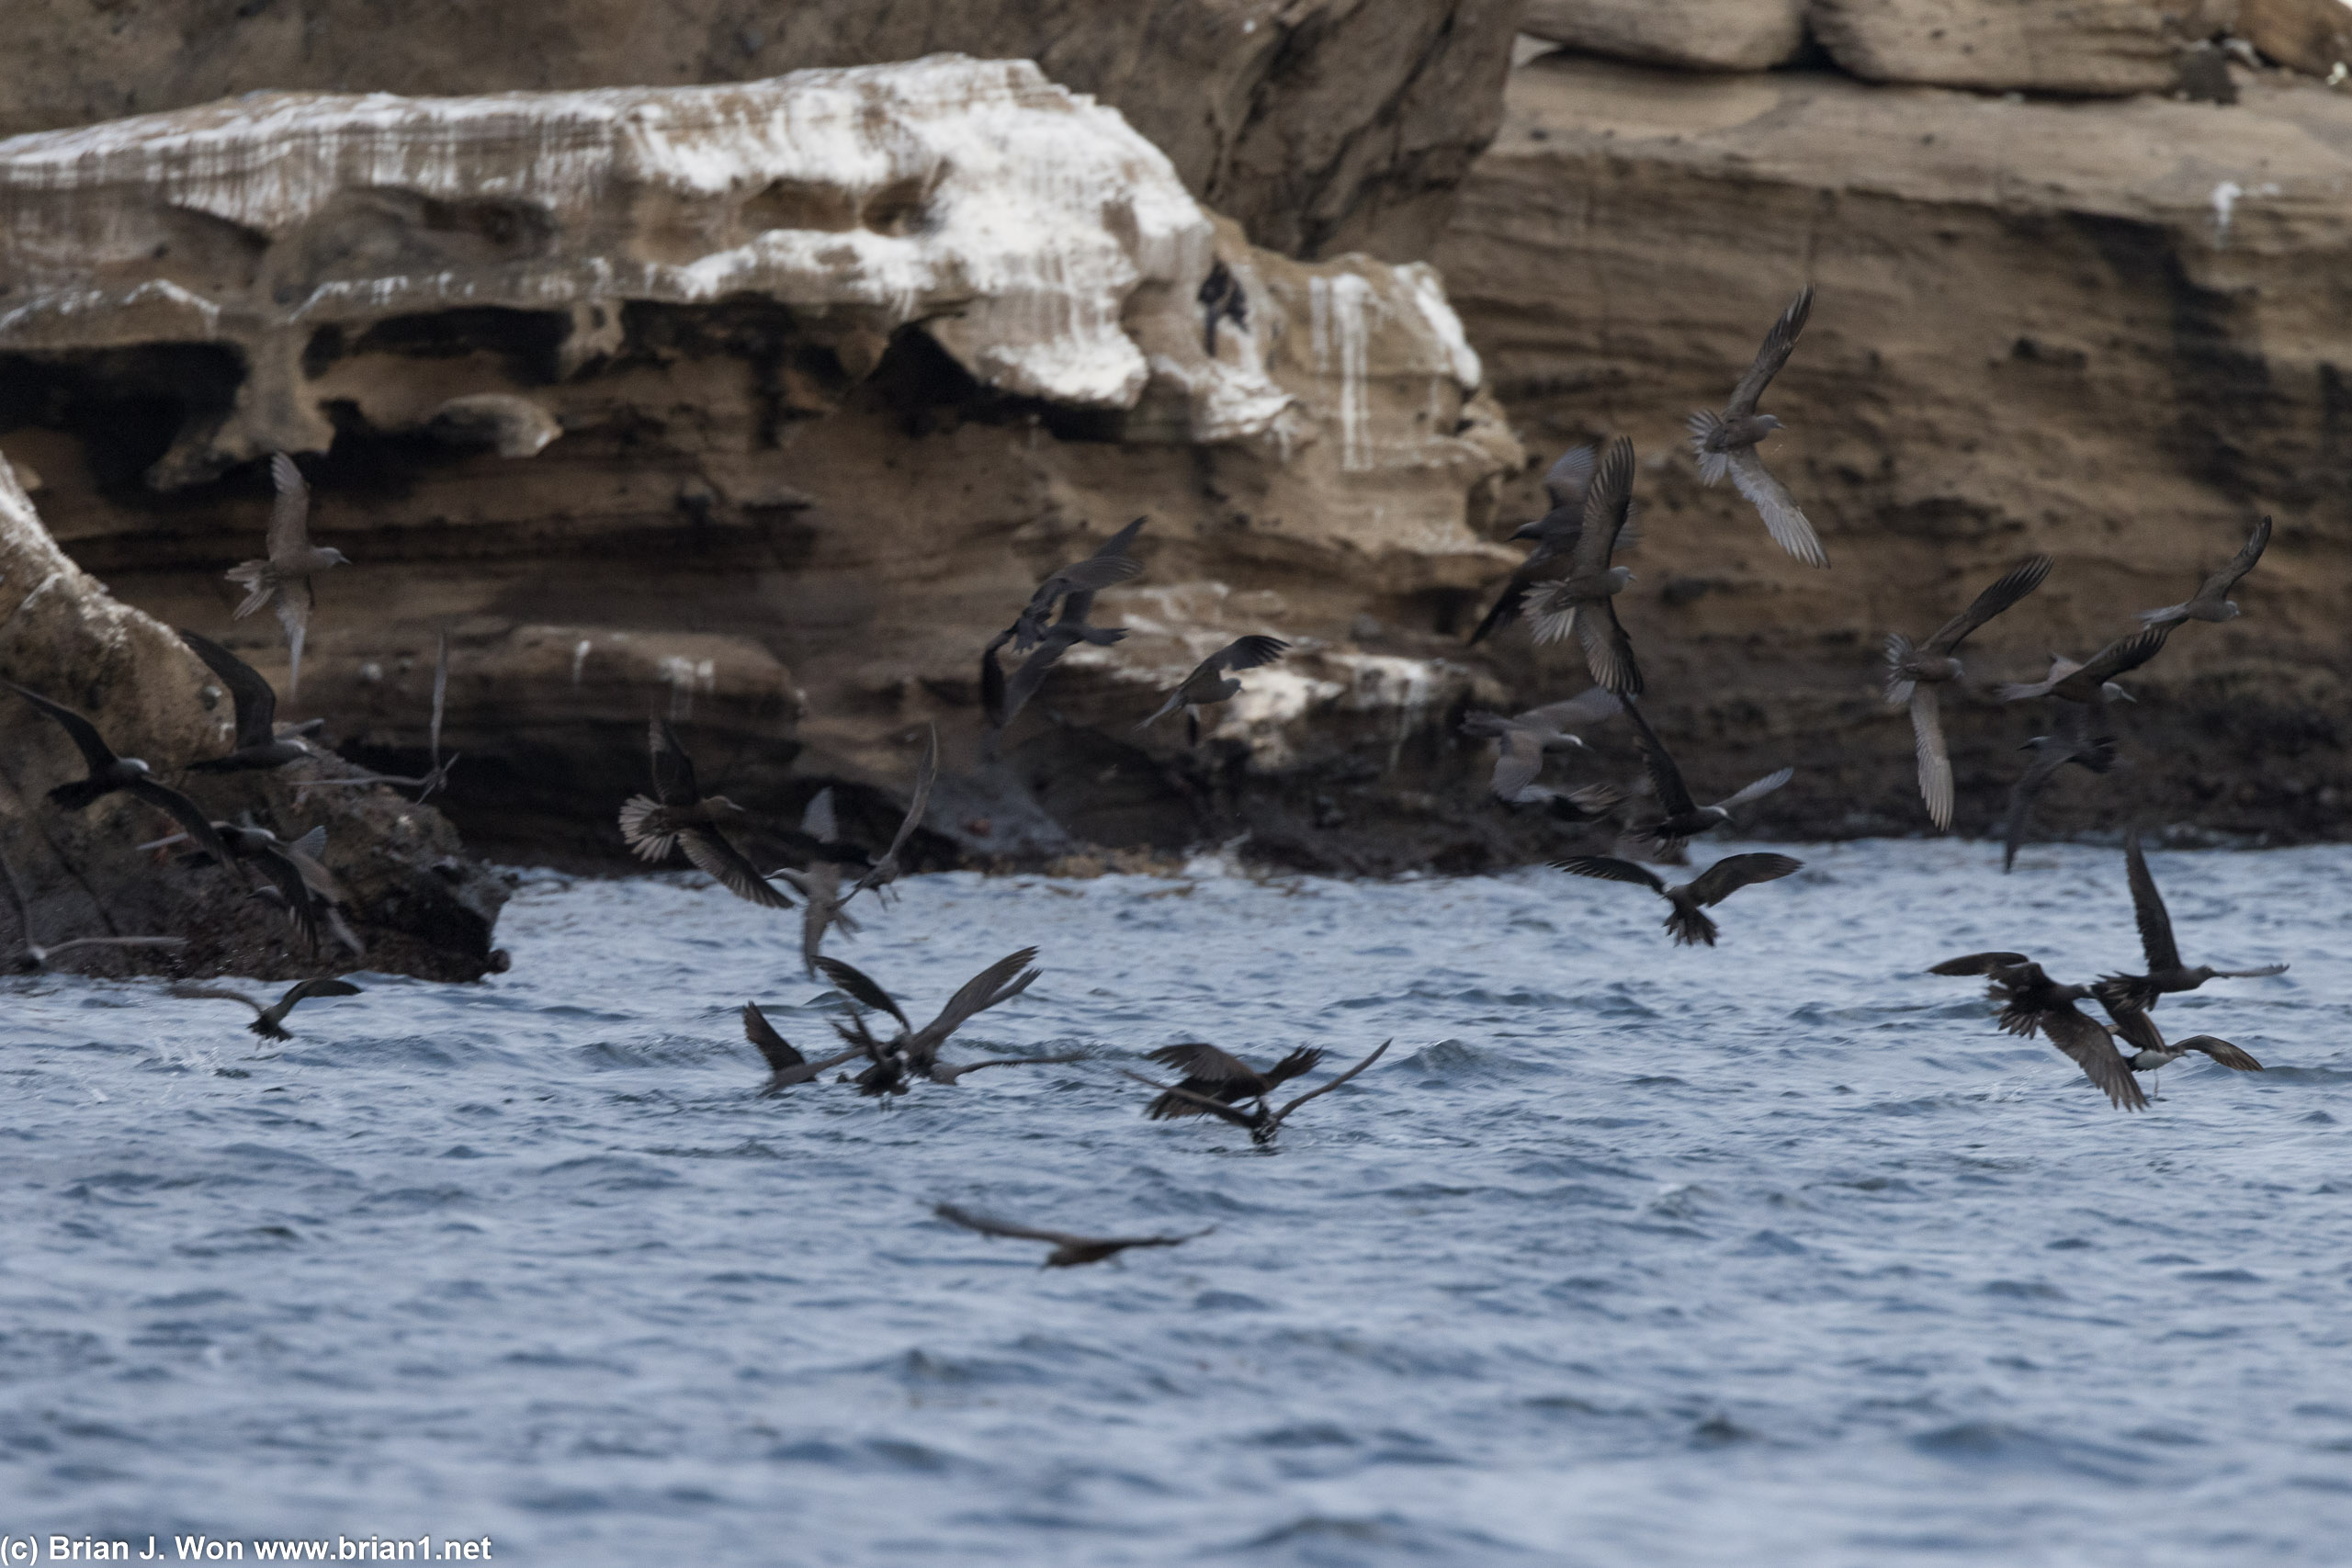 From the lighter heads, guessing these are brown noddy terns.